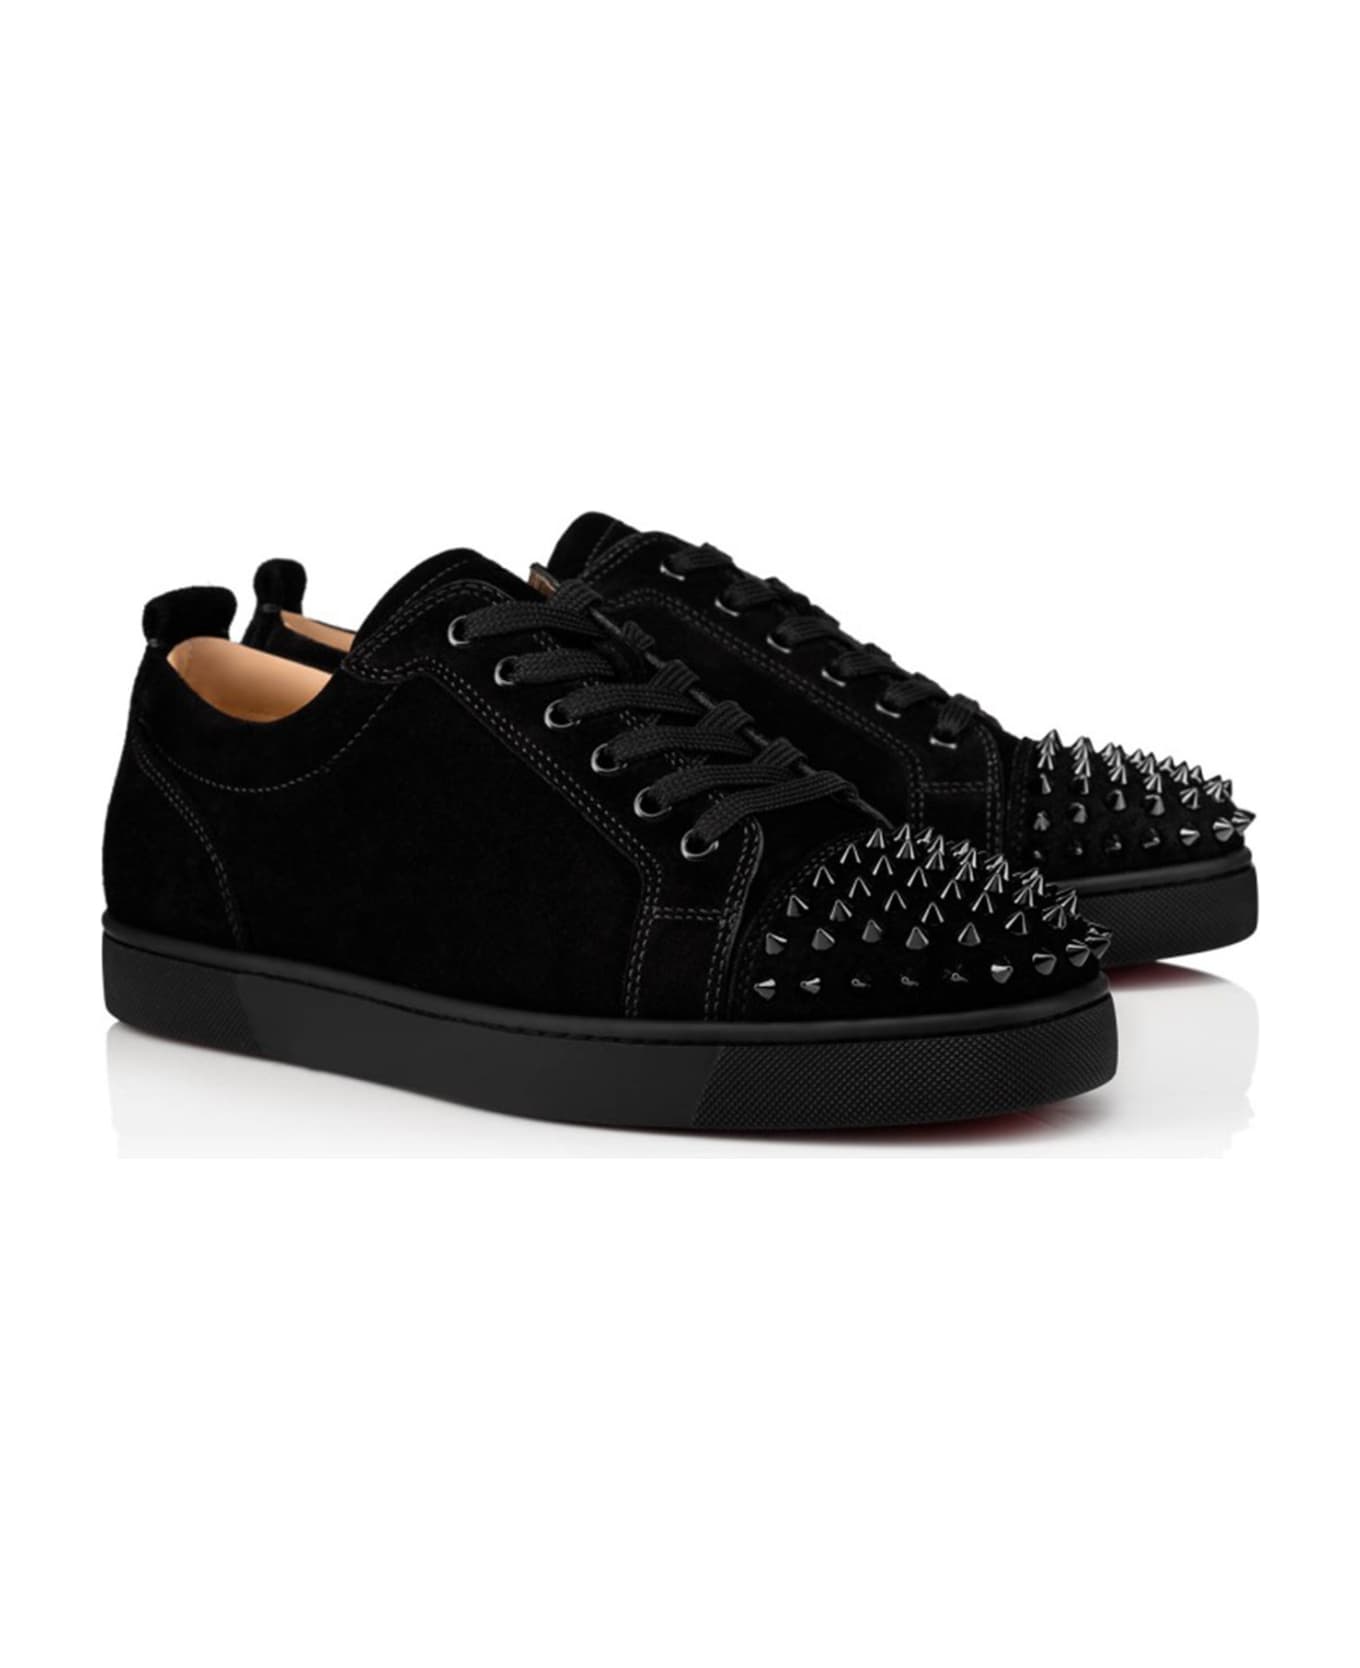 Christian Louboutin Louis Sneakers With Spikes